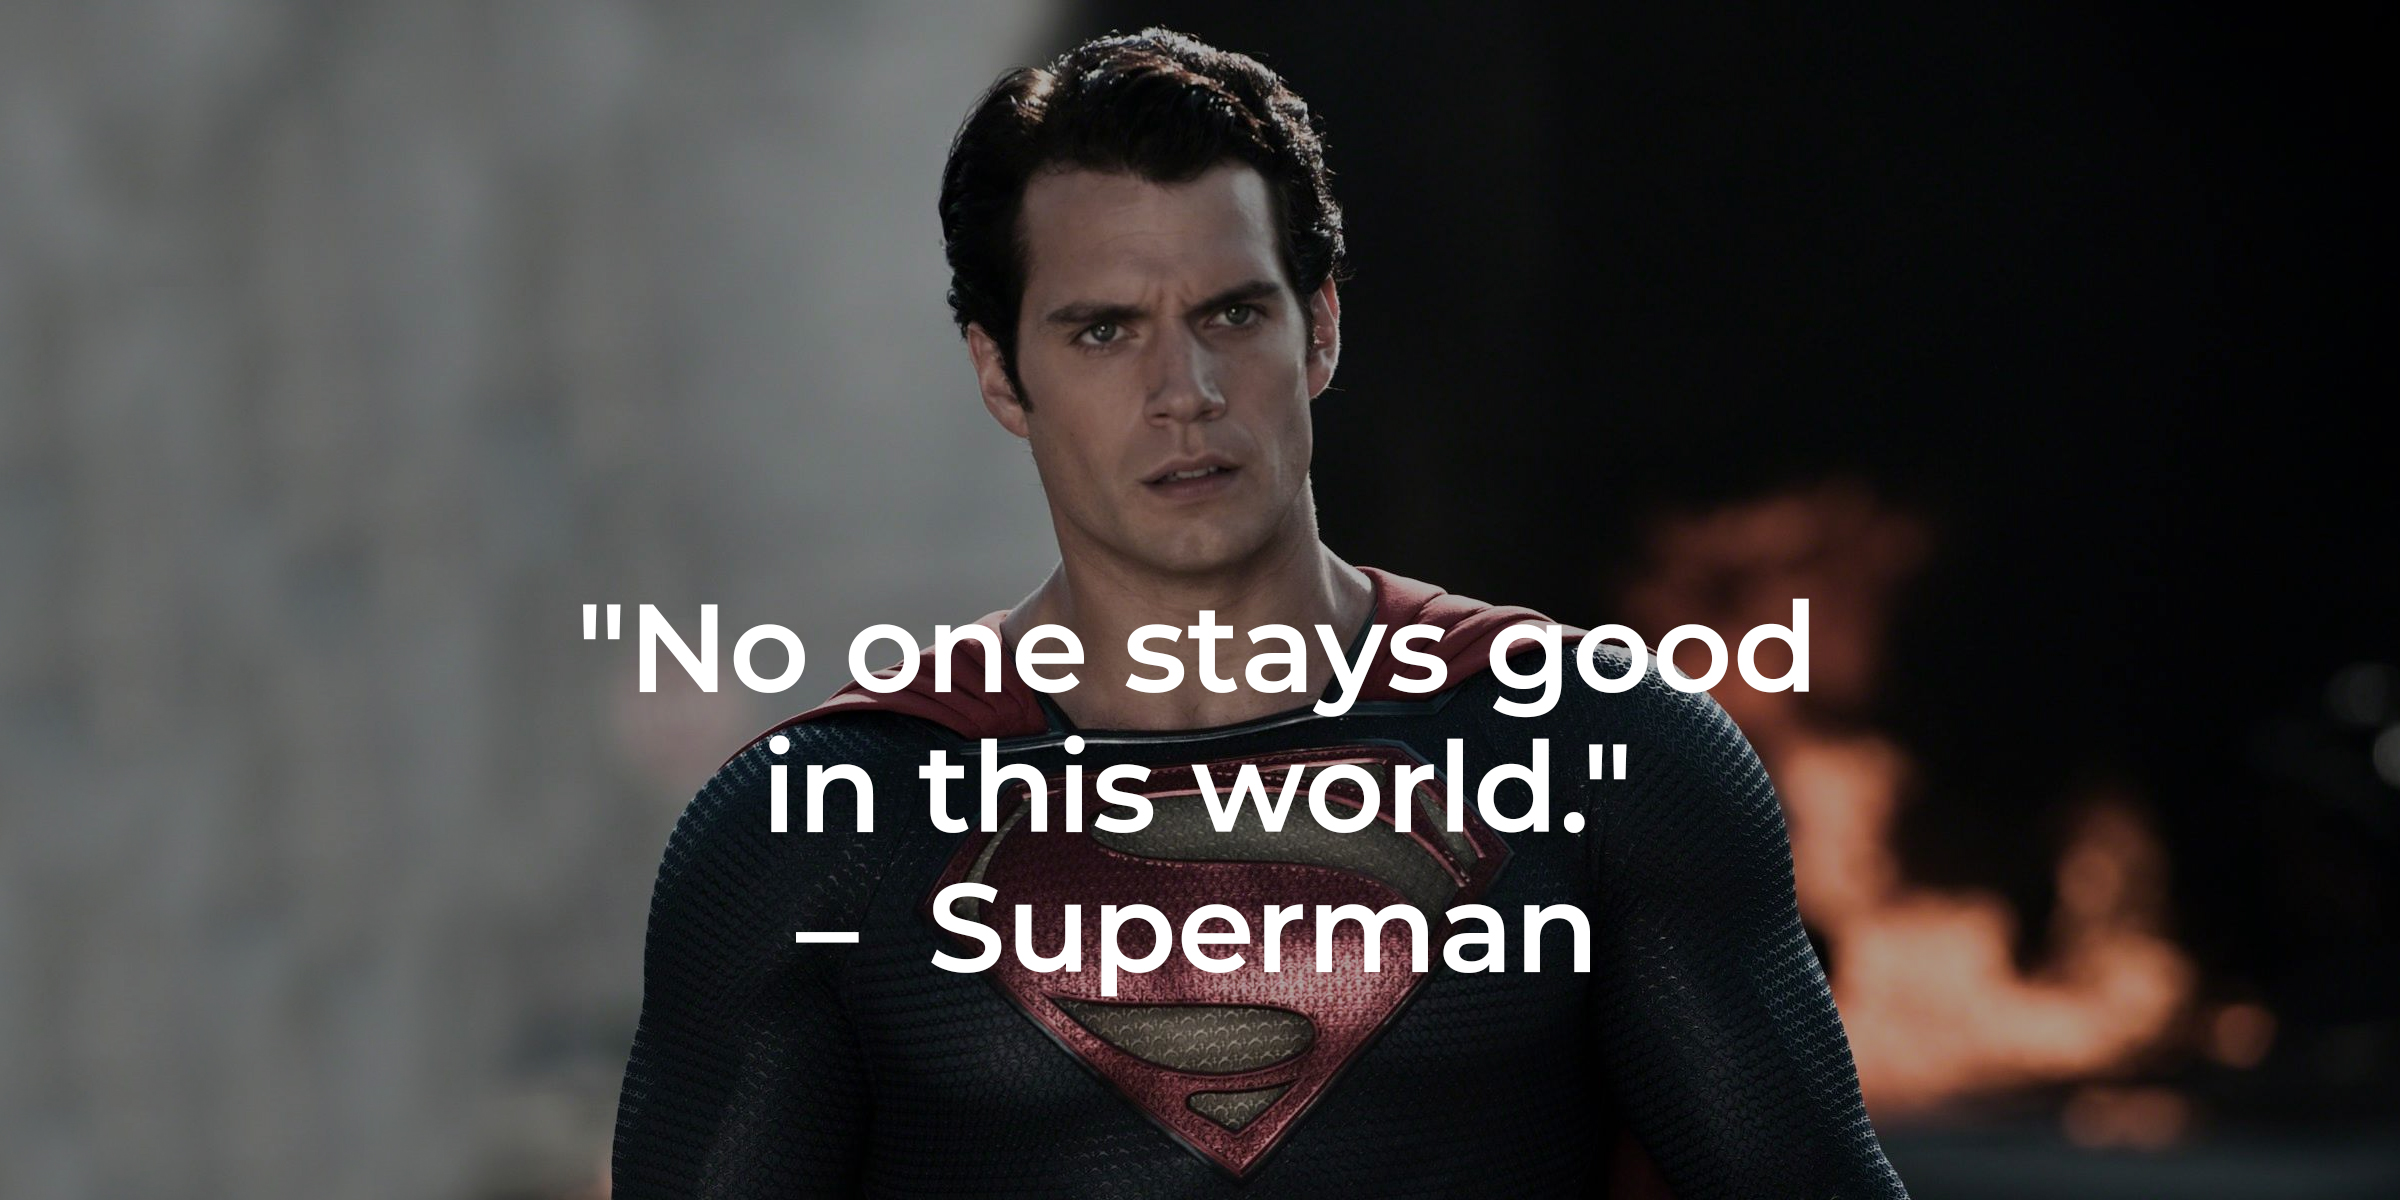 Superman’s quote: "No one stays good in this world." | Source: Facebook/manofsteel